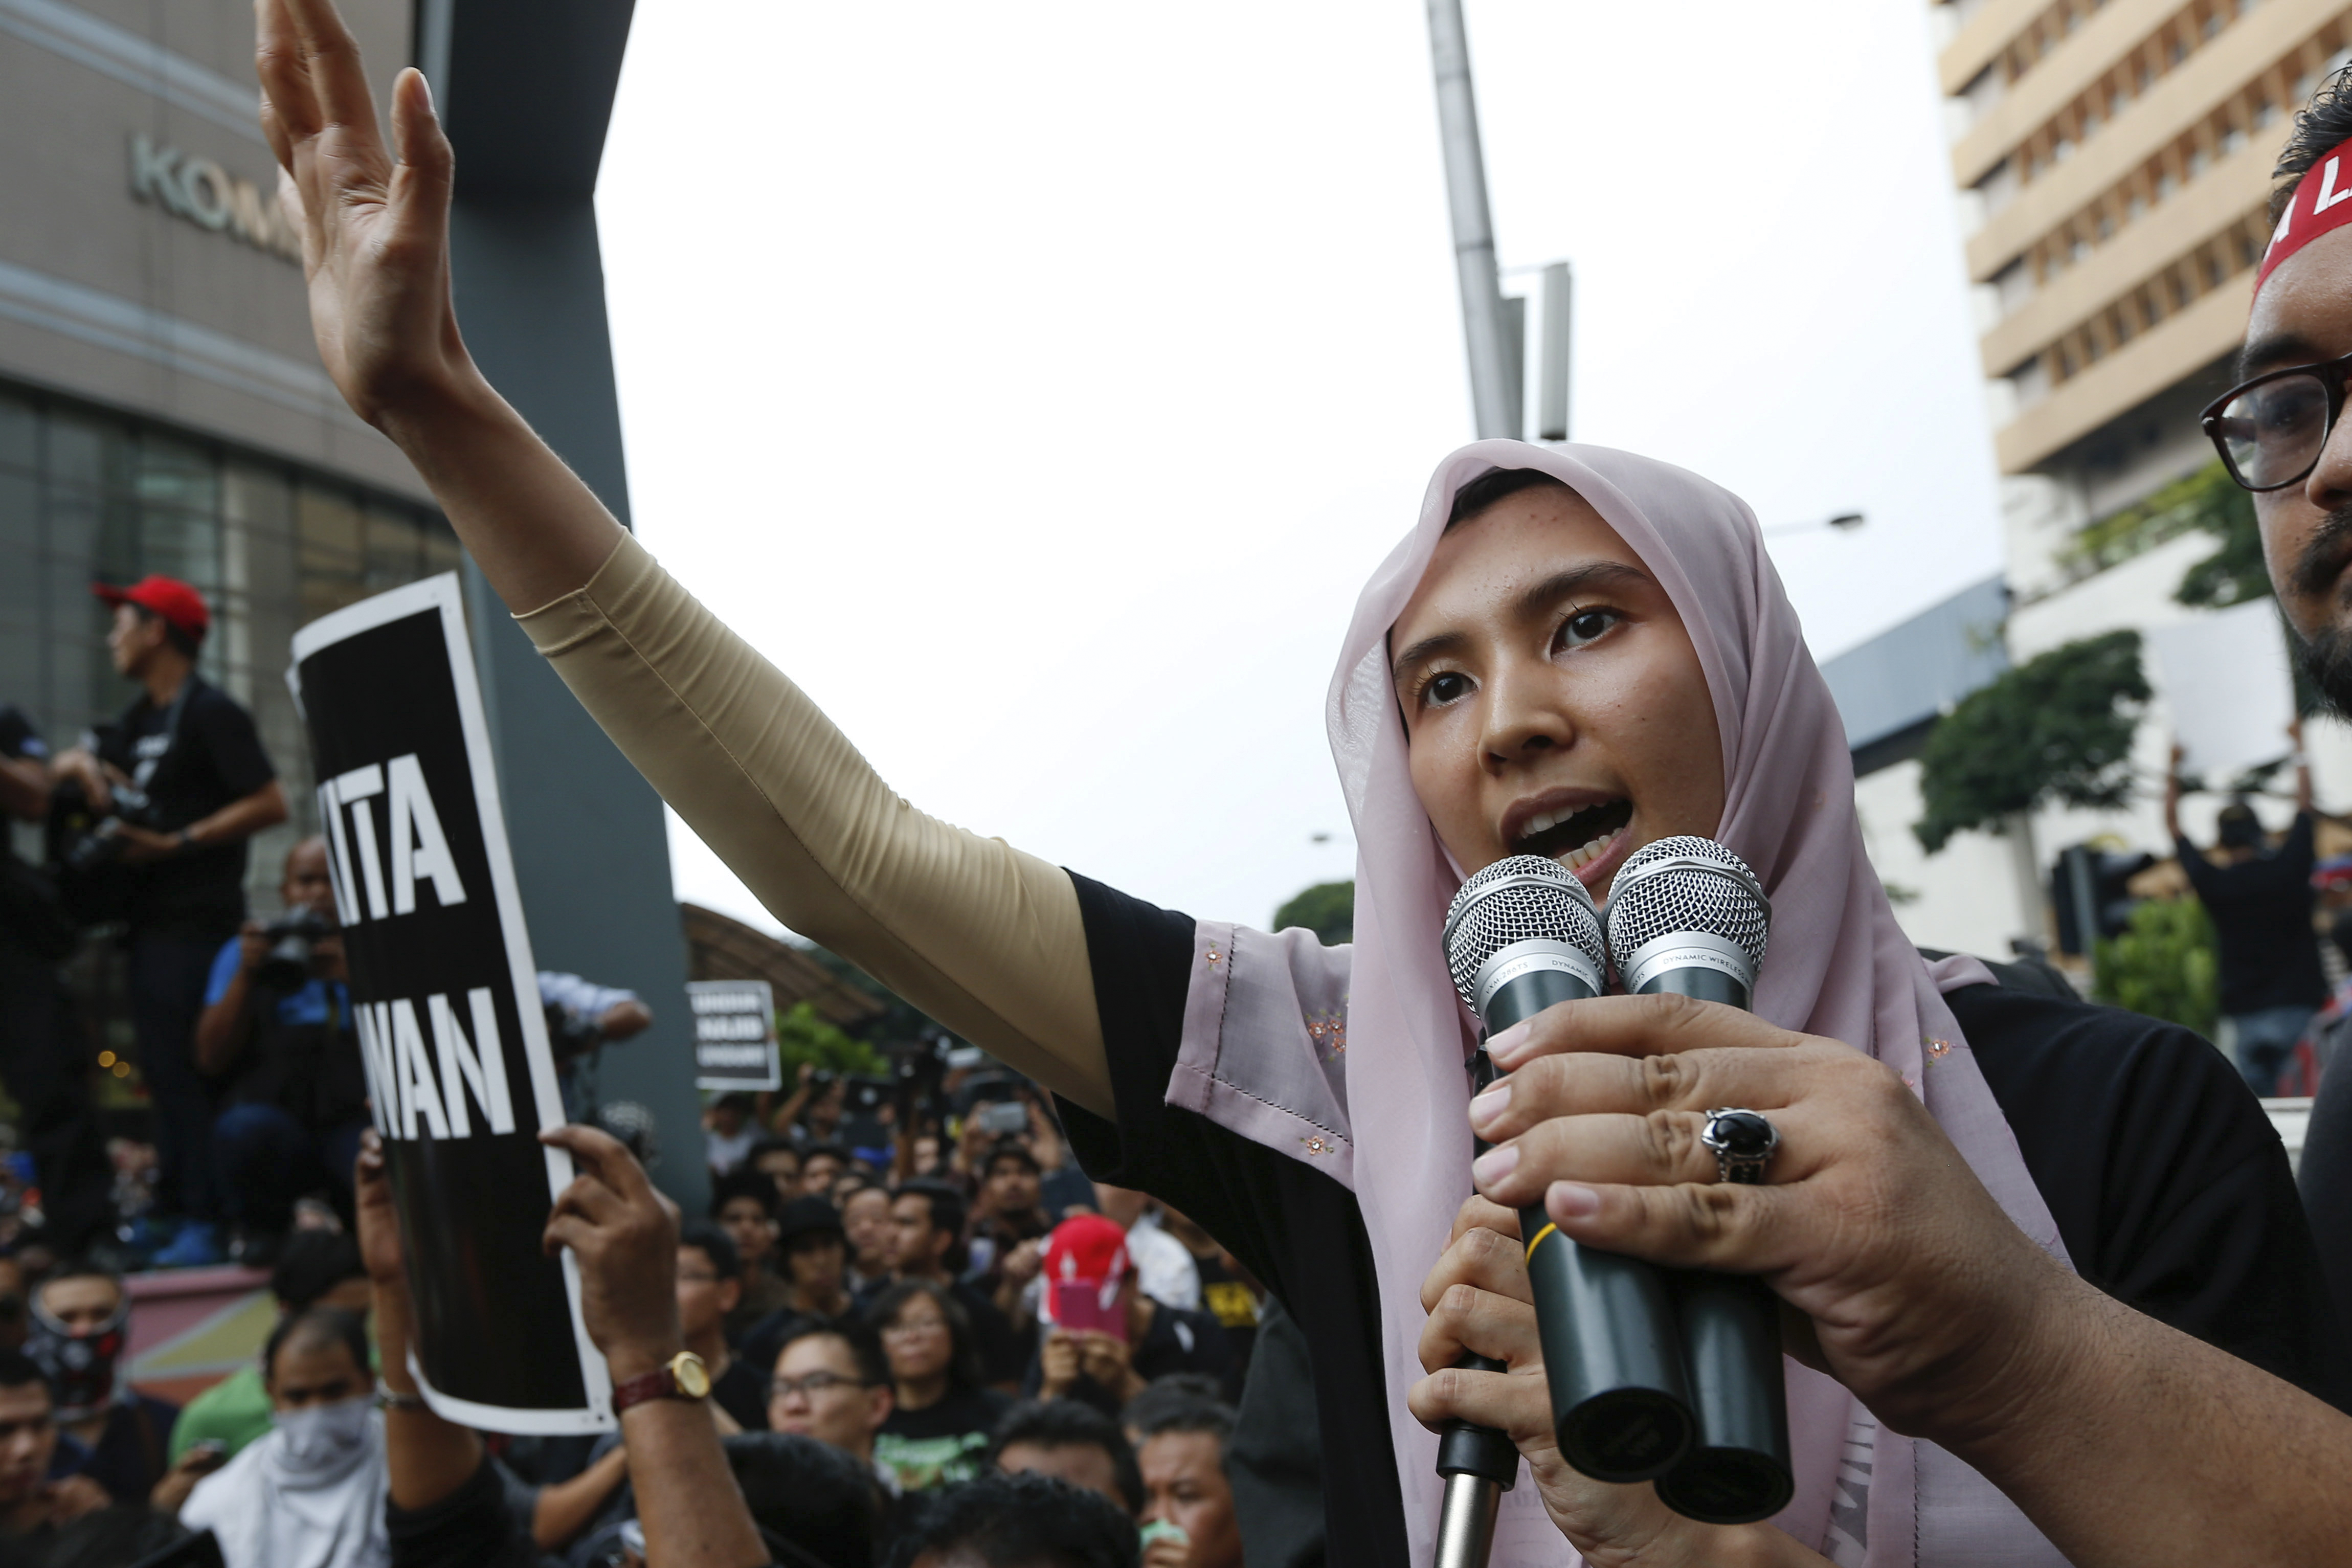 Lawmaker and a vice-president of the People's Justice Party Nurul Izzah Anwar, speaks to protesters as they gather to demand the freedom of her father, Anwar Ibrahim, in downtown Kuala Lumpur, March 7, 2015.